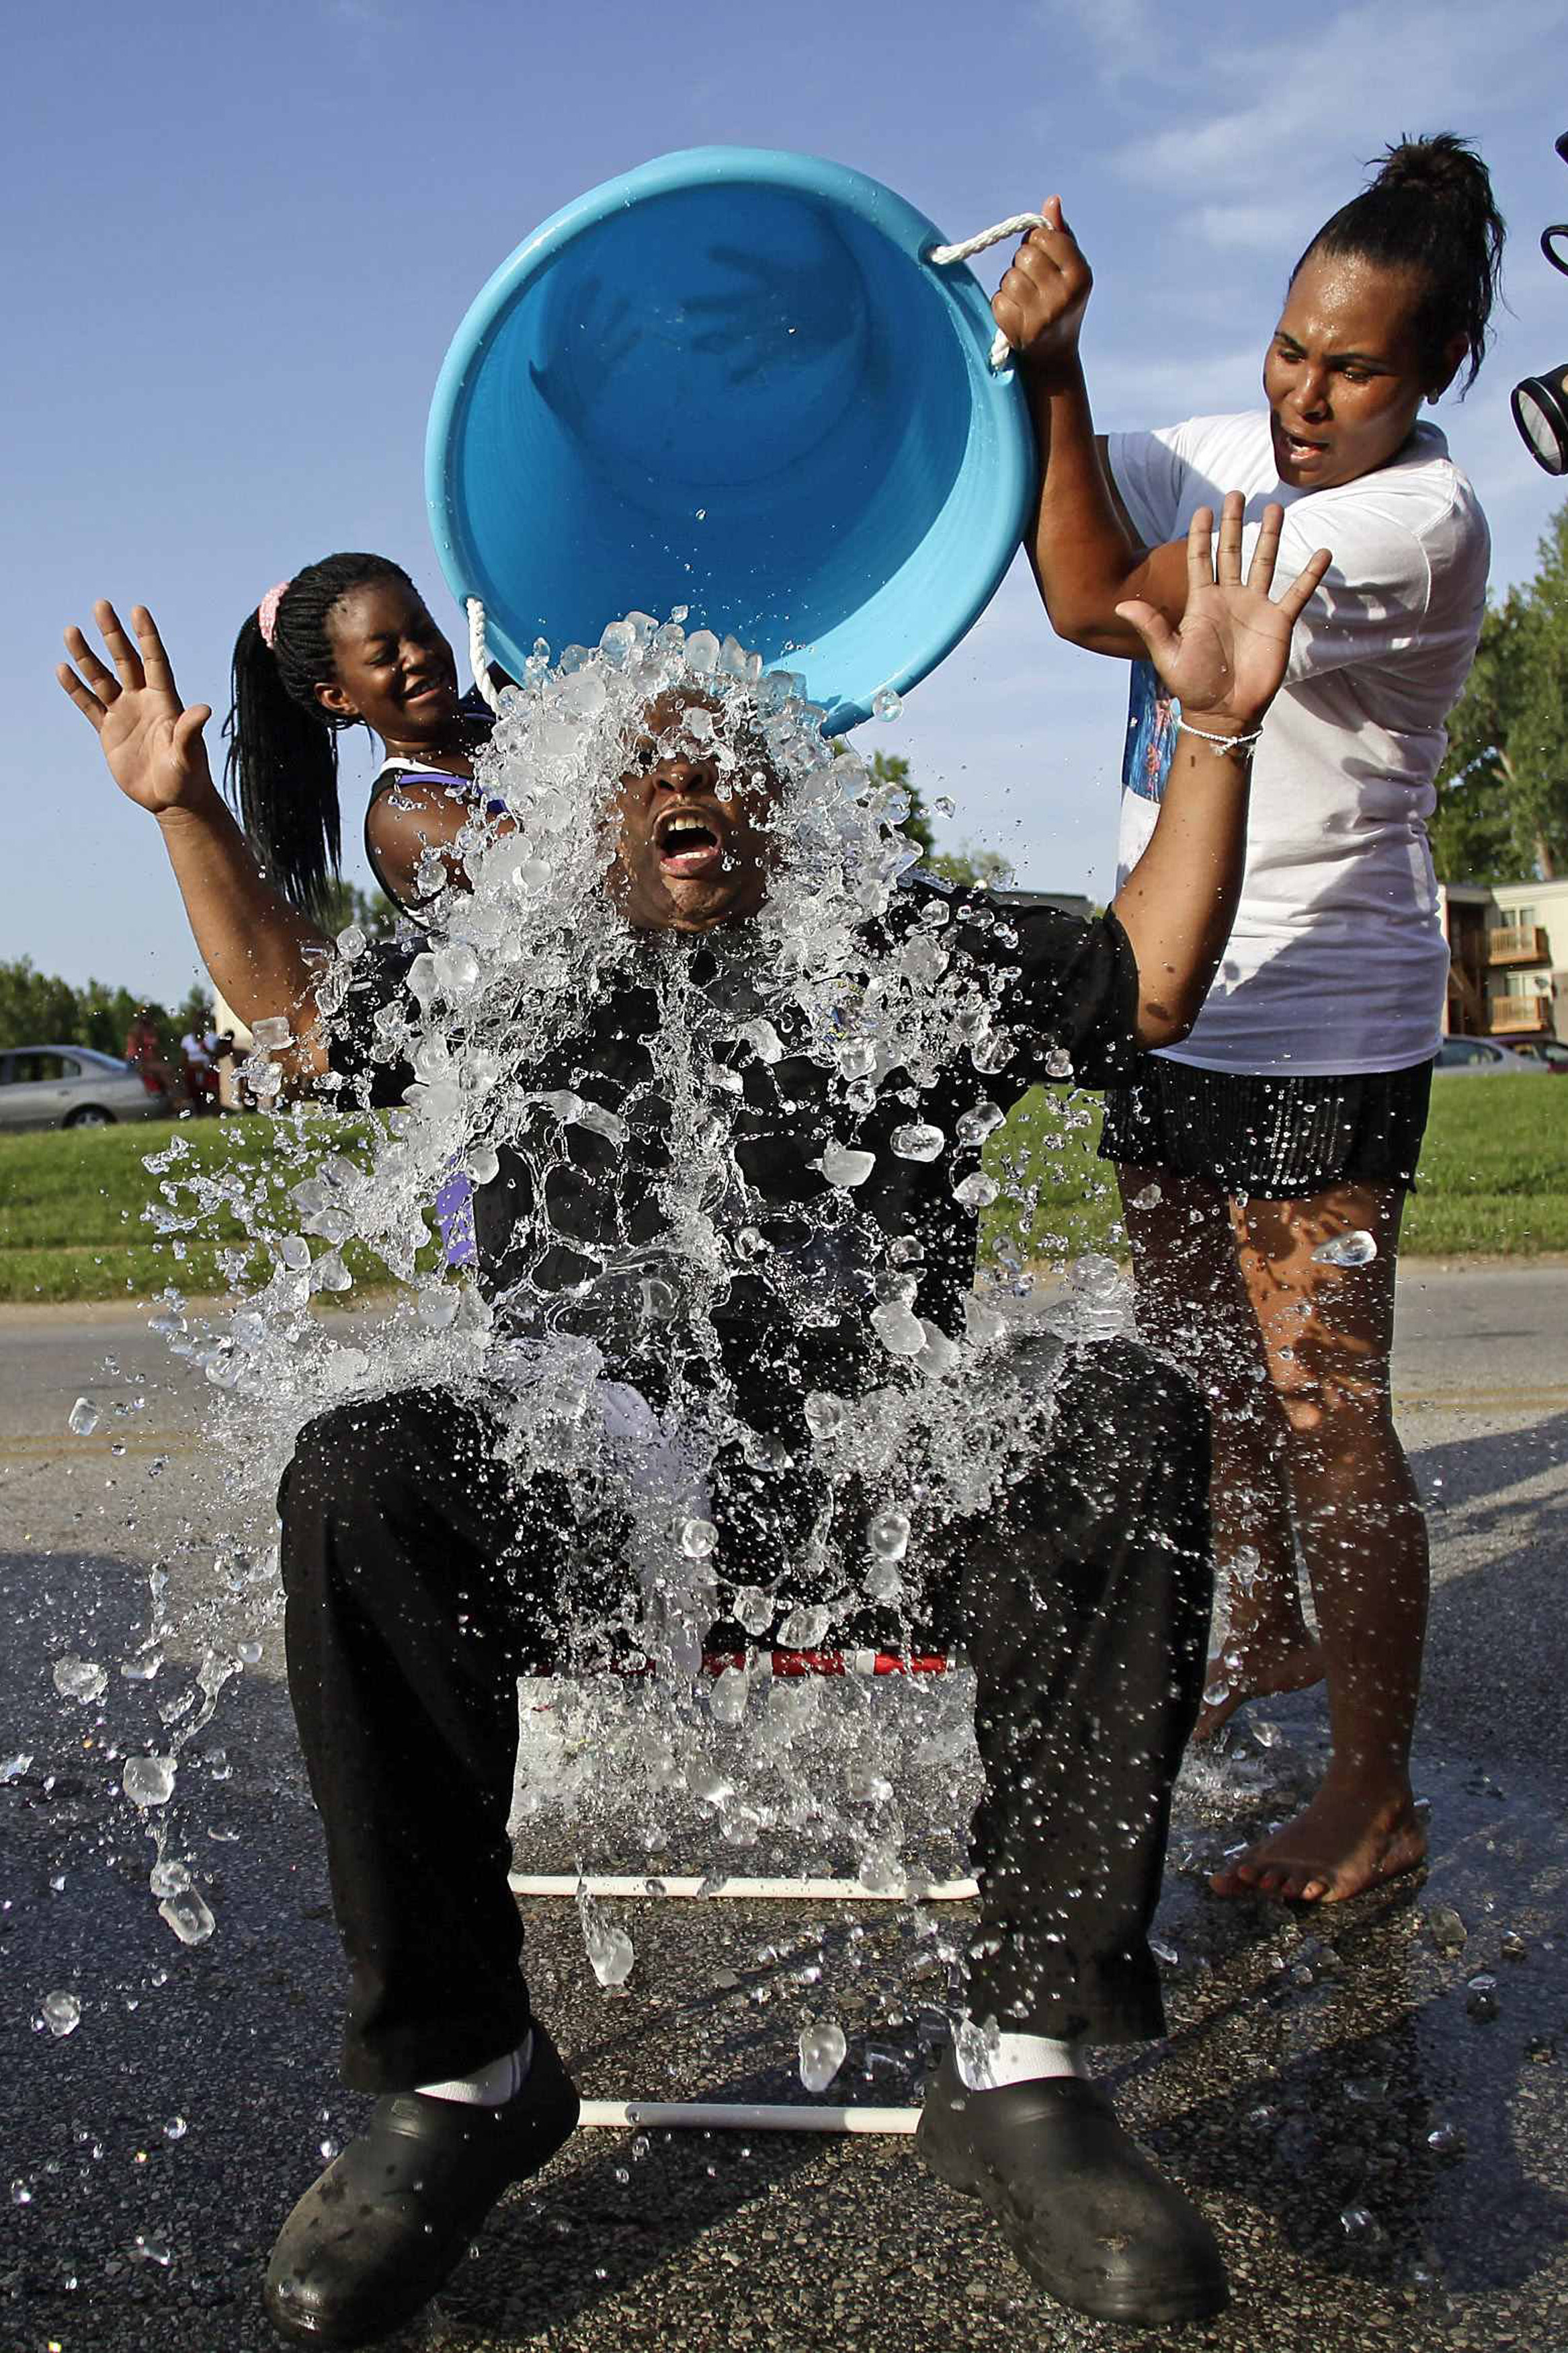 Supporters of Michael Brown, Kalisha Gilmore (L) and Recorida Kennedy (R), pour ice water on Kevin Ephron as he takes the ice bucket challenge in remembrance of Brown along Canfield Drive, where he was fatally shot by a police officer in Ferguson, Missouri August 24, 2014. 